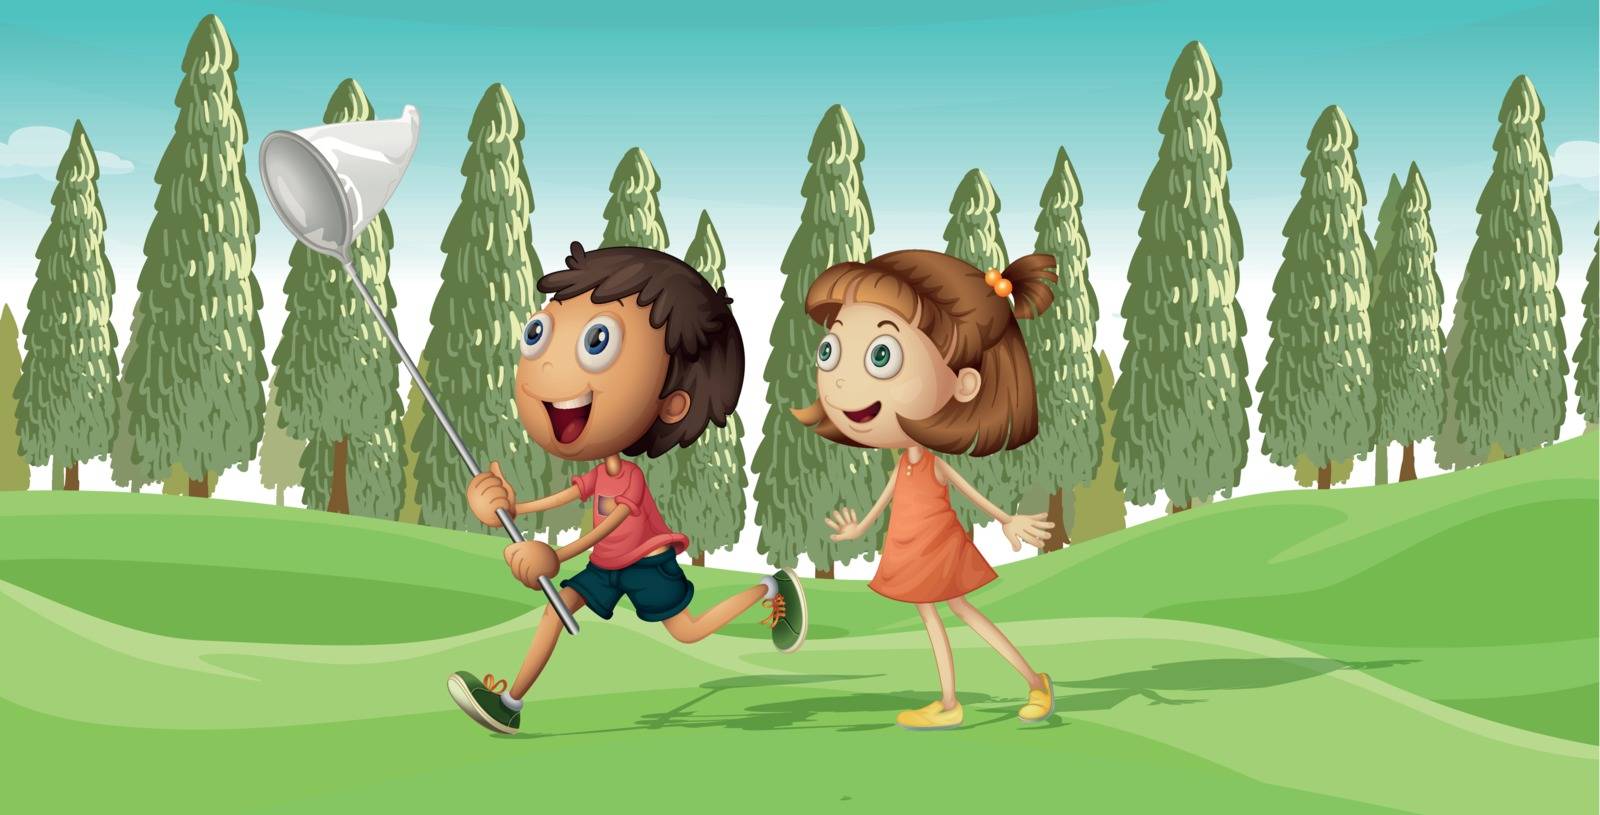 Illustration of a running boy and a girl with net